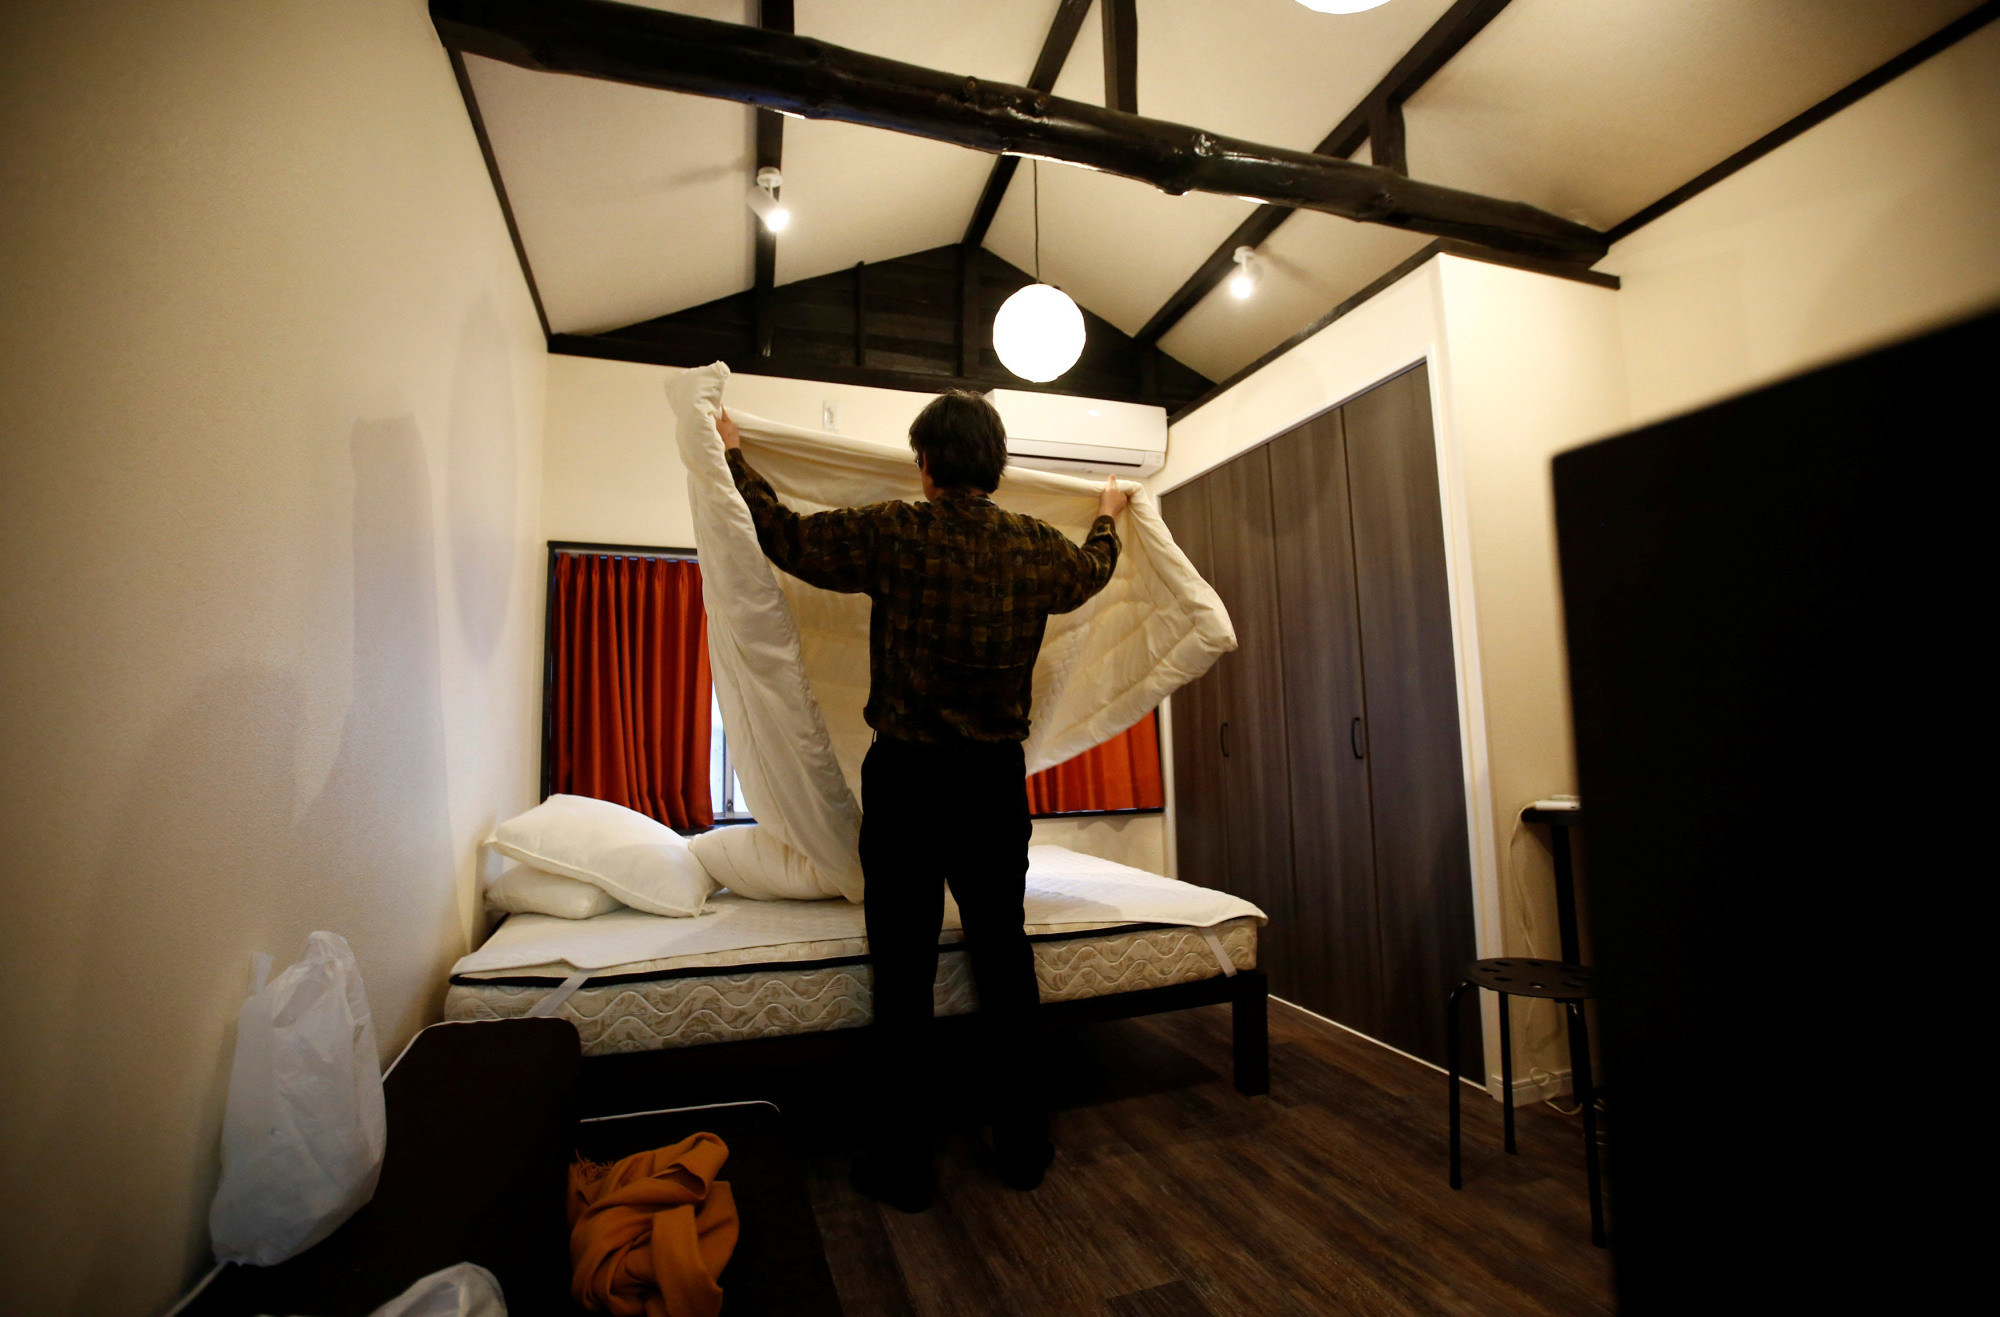 Yasuhiro Inaoka, who manages apartments for owners who provide short-term lodging services, arranges a bed after guests checked out at a Tokyo apartment that is listed on Airbnb. | REUTERS